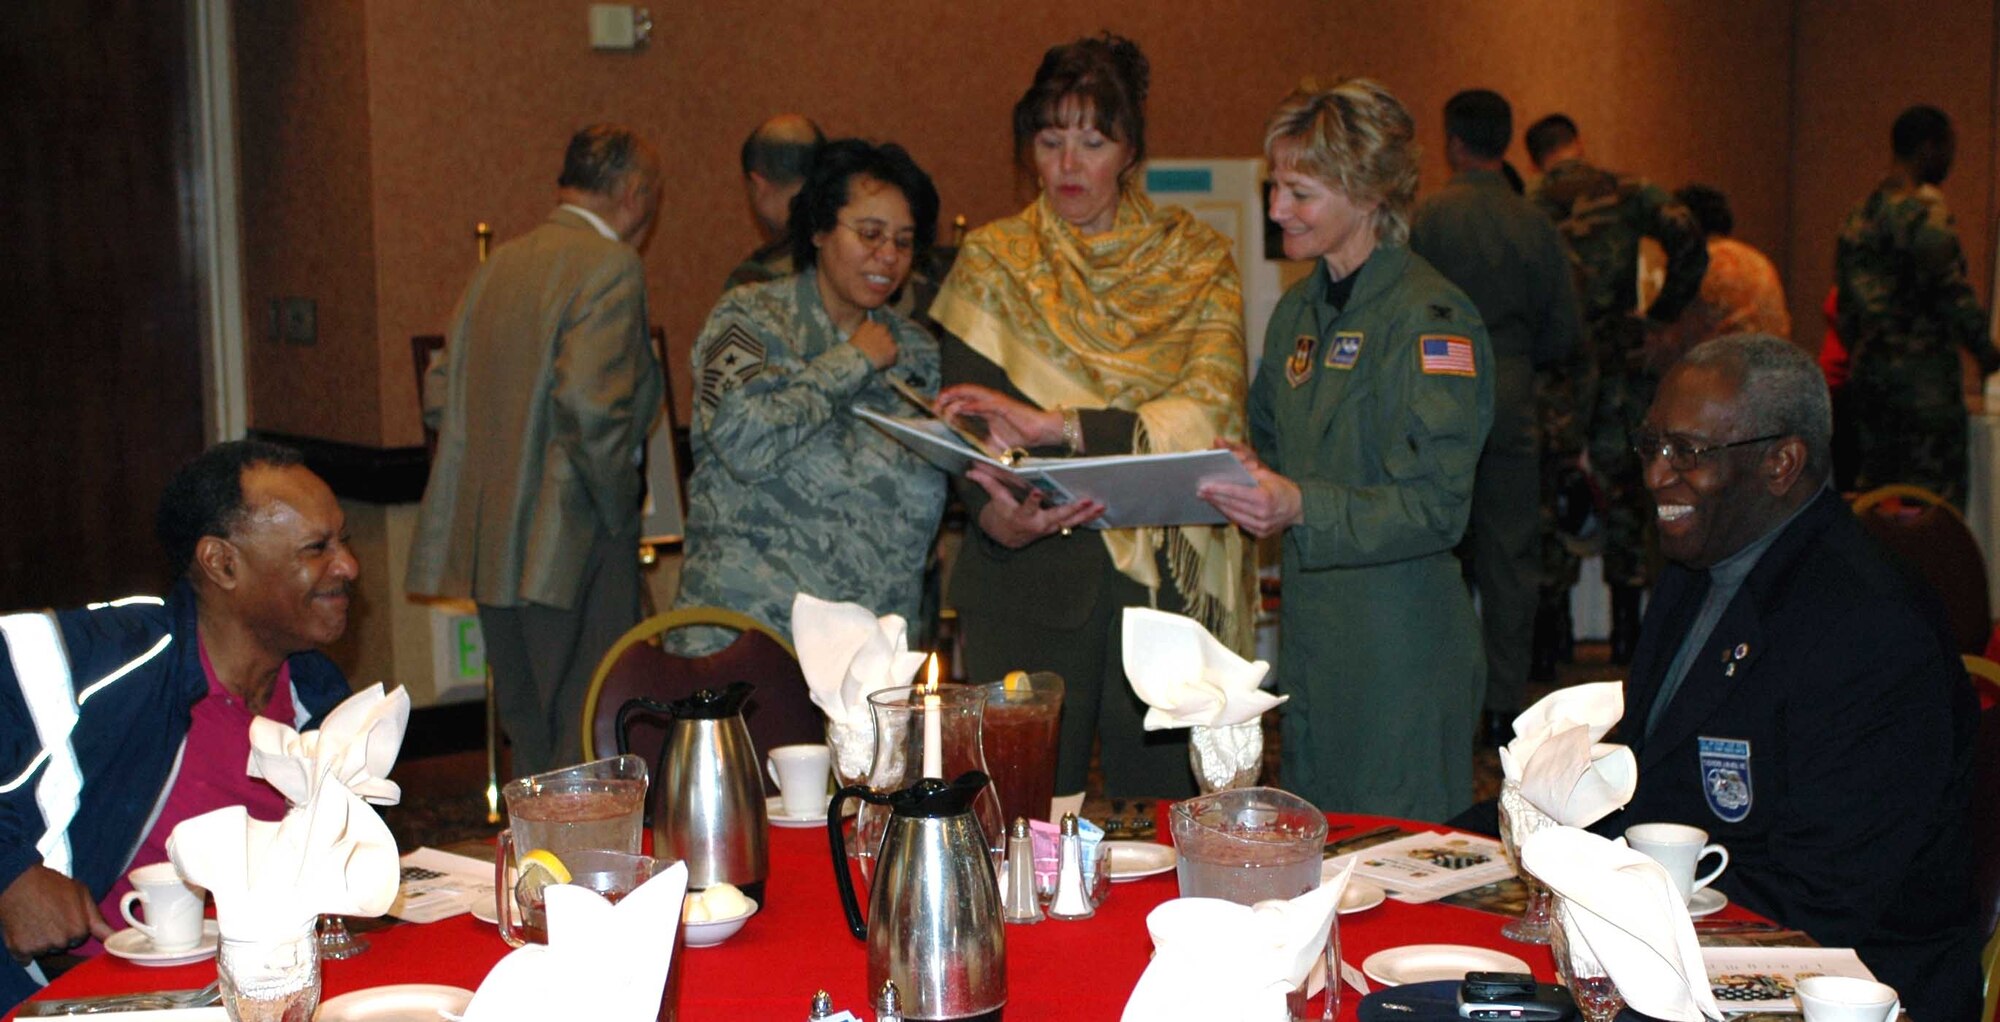 Col. Maryanne Miller, (right), 349th Air Mobility Wing commander, looks over photos with Chief Master Sgt. Christine Taylor, (left), 349th AMW command chief, and a Tuskegee Airman family member during the Tuskegee Airmen Luncheon at the Delta Breeze Club Feb. 19. The luncheon, sponsered by the African American Heritage Committee, was held in honor of Black History Month. (U.S. Air Force photo/Airman 1st Class Kristen Rohrer)

